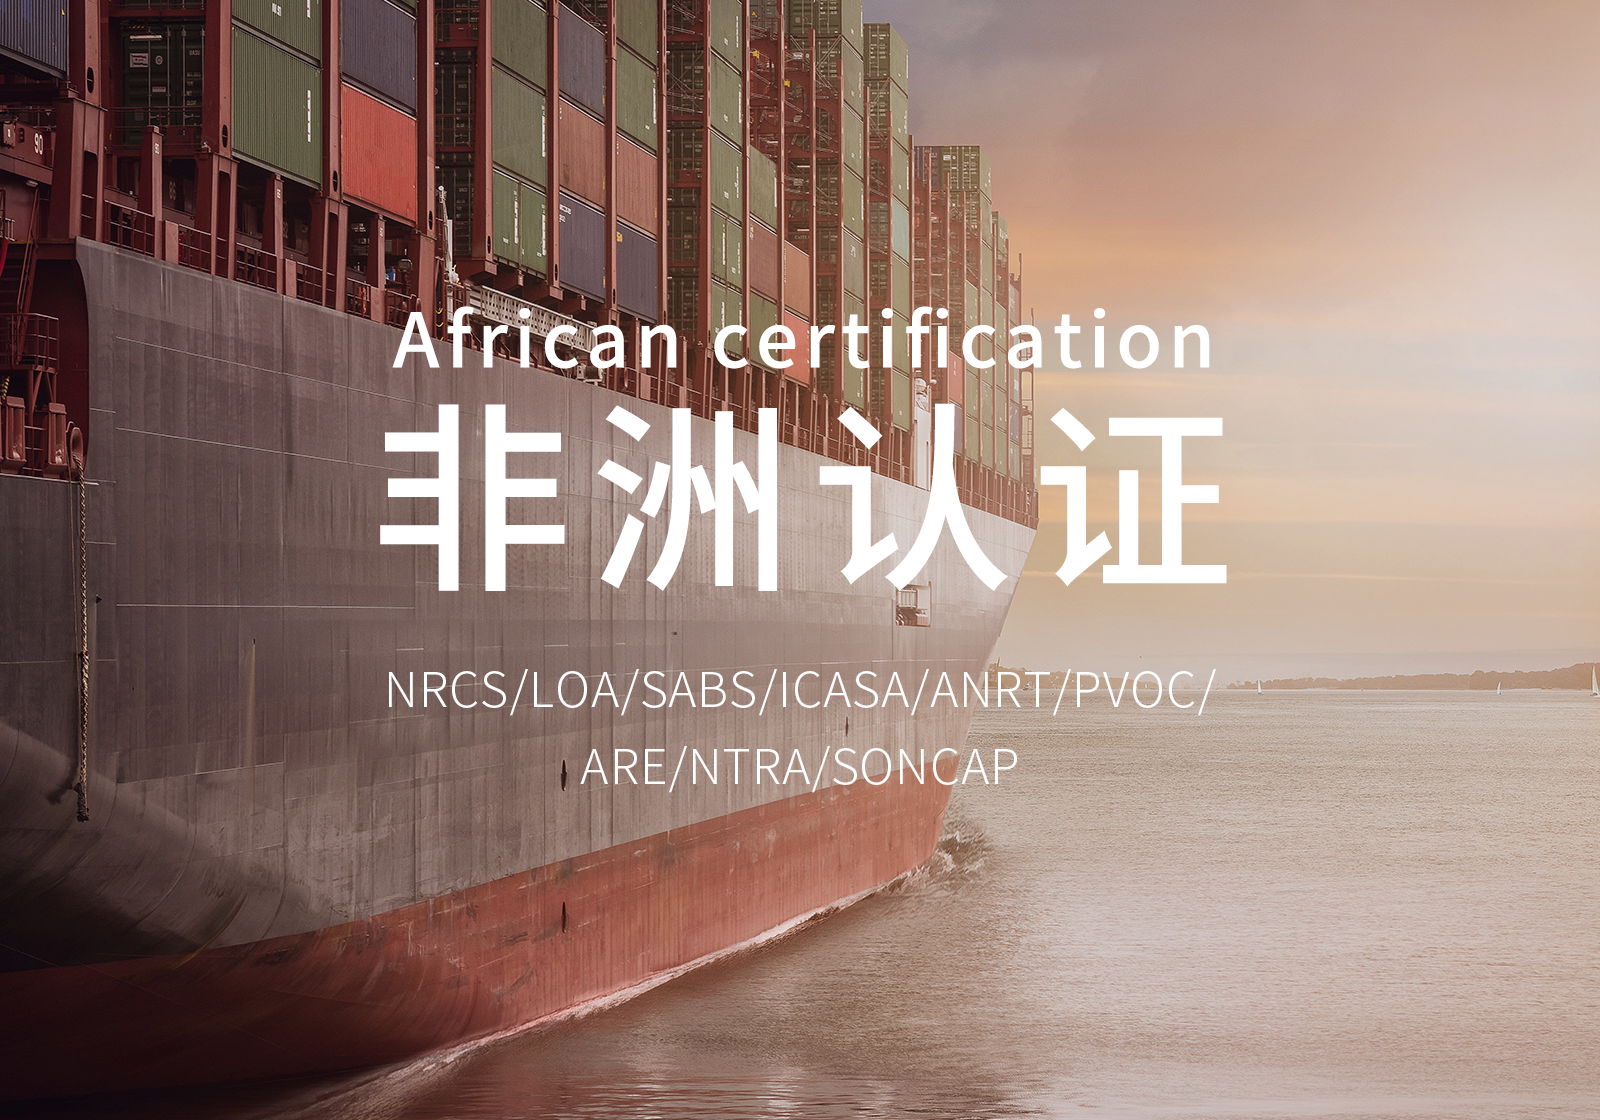 African certification